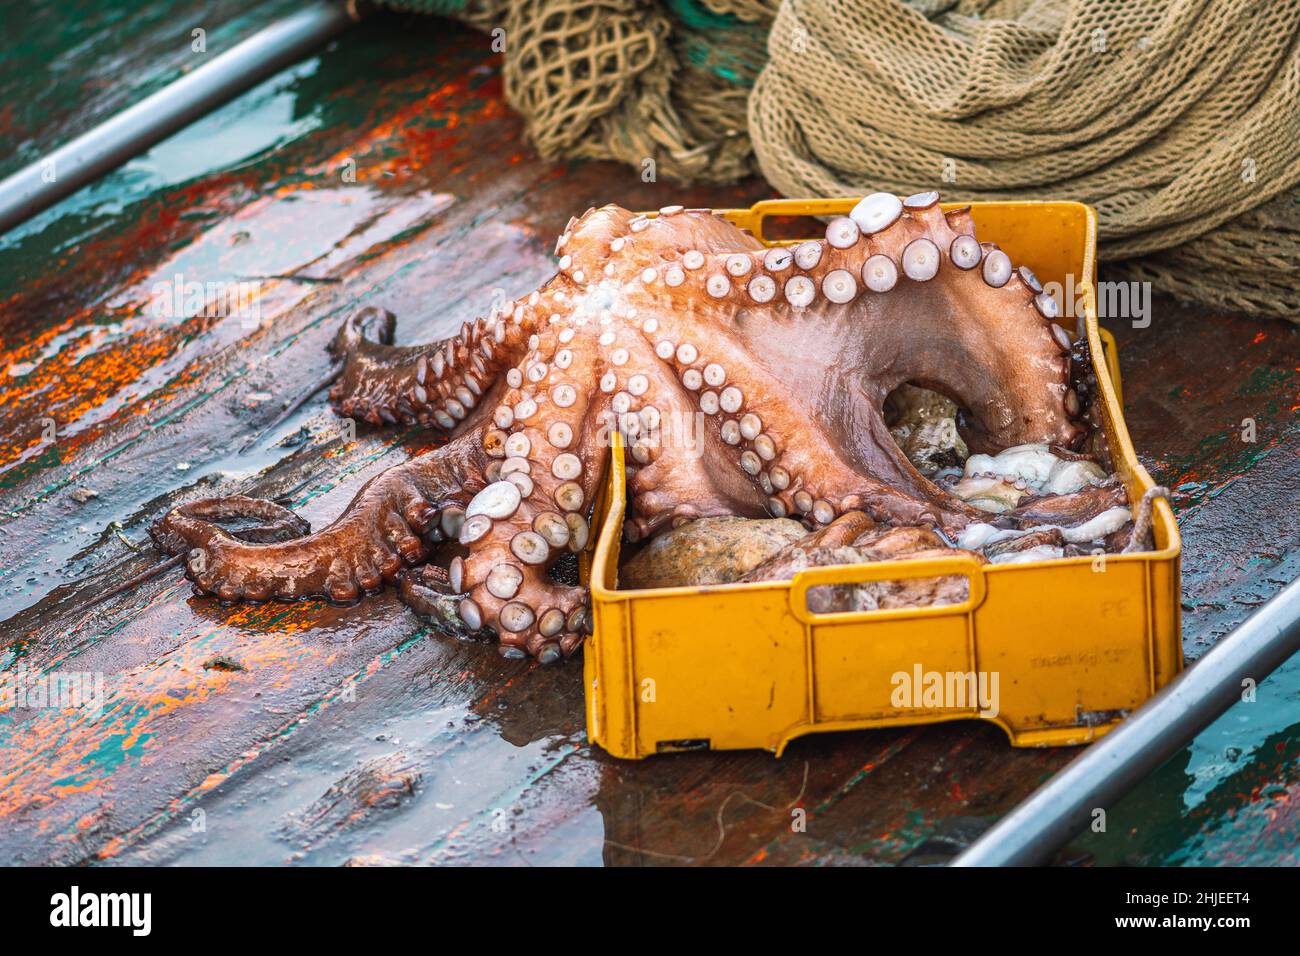 Freshly just caught big octopus in a plastic crate on a fishing